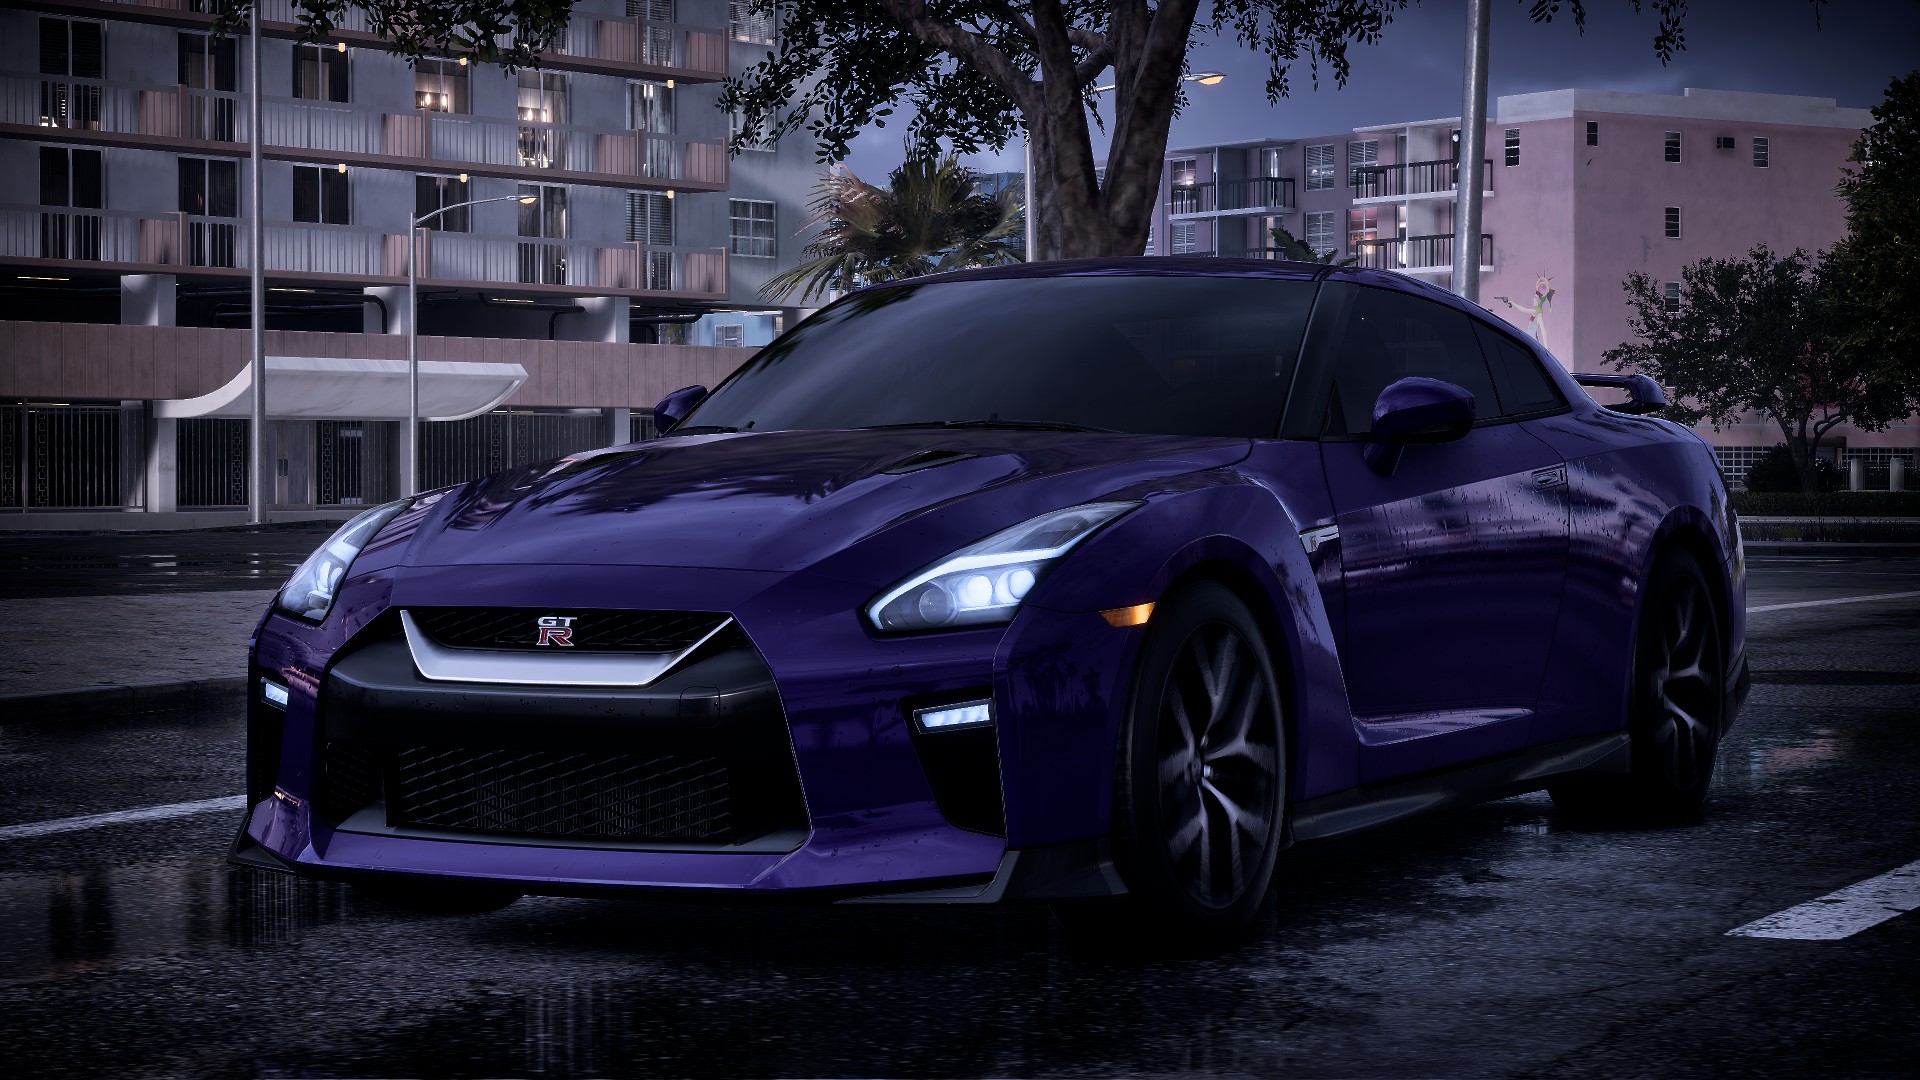 Nissan Nissan GT R NiSMO Car 4K Need For Speed Heat Purple Japanese Cars Street View City 1920x1080